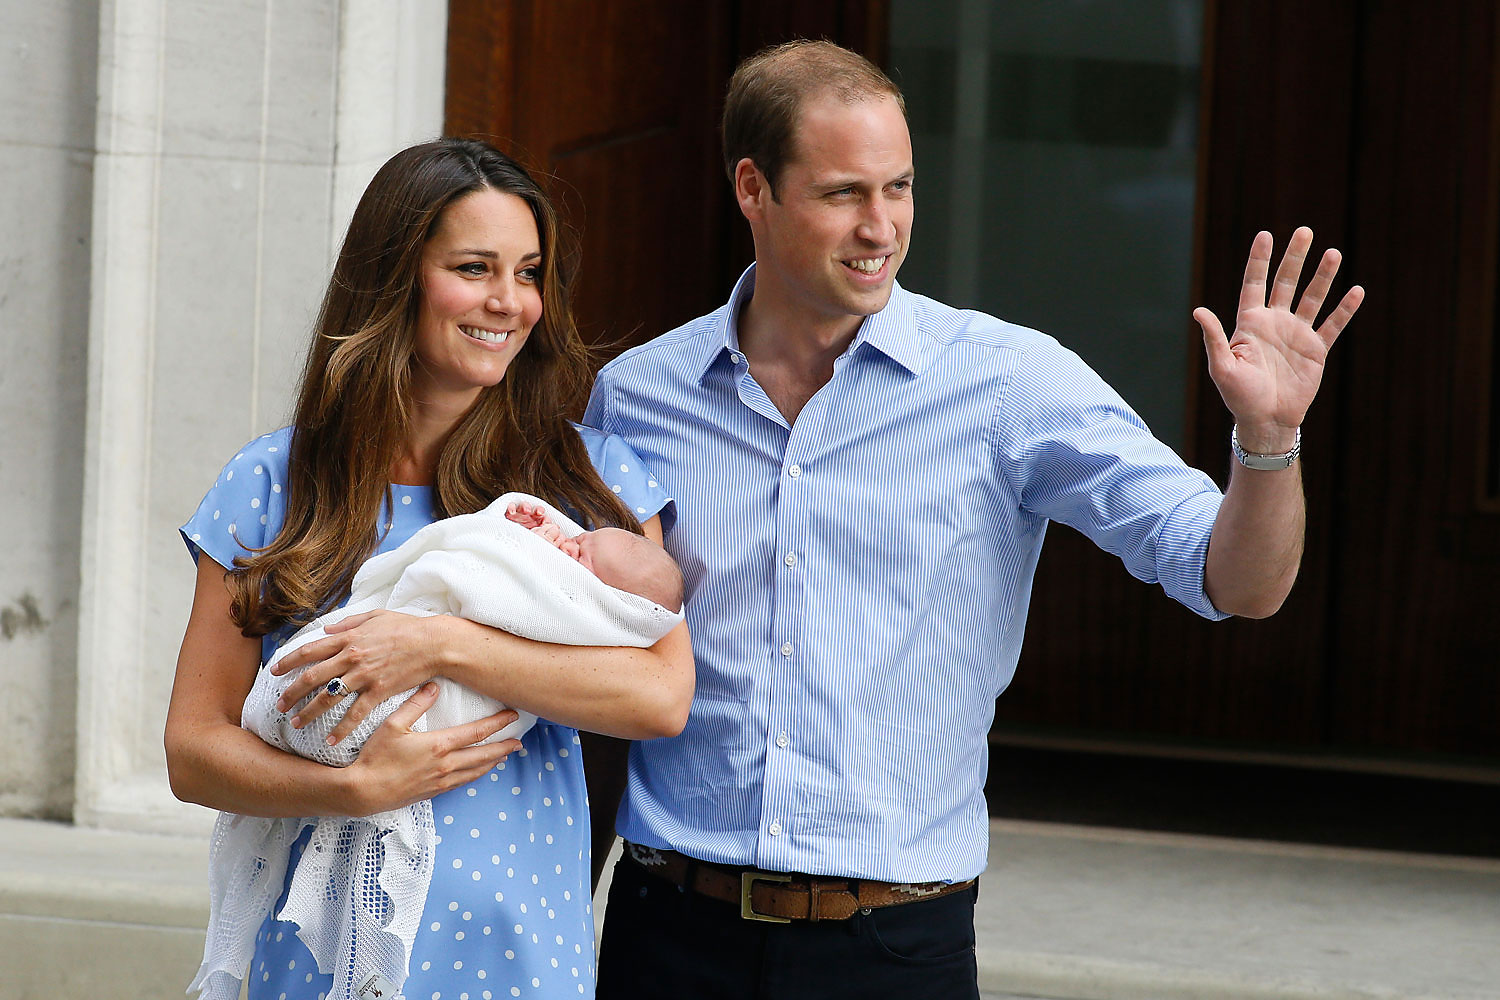 Prince William, right, and Kate, Duchess of Cambridge, hold the Prince of Cambridge, as they pose for photographers outside St. Mary's Hospital in London, July 23, 2013.